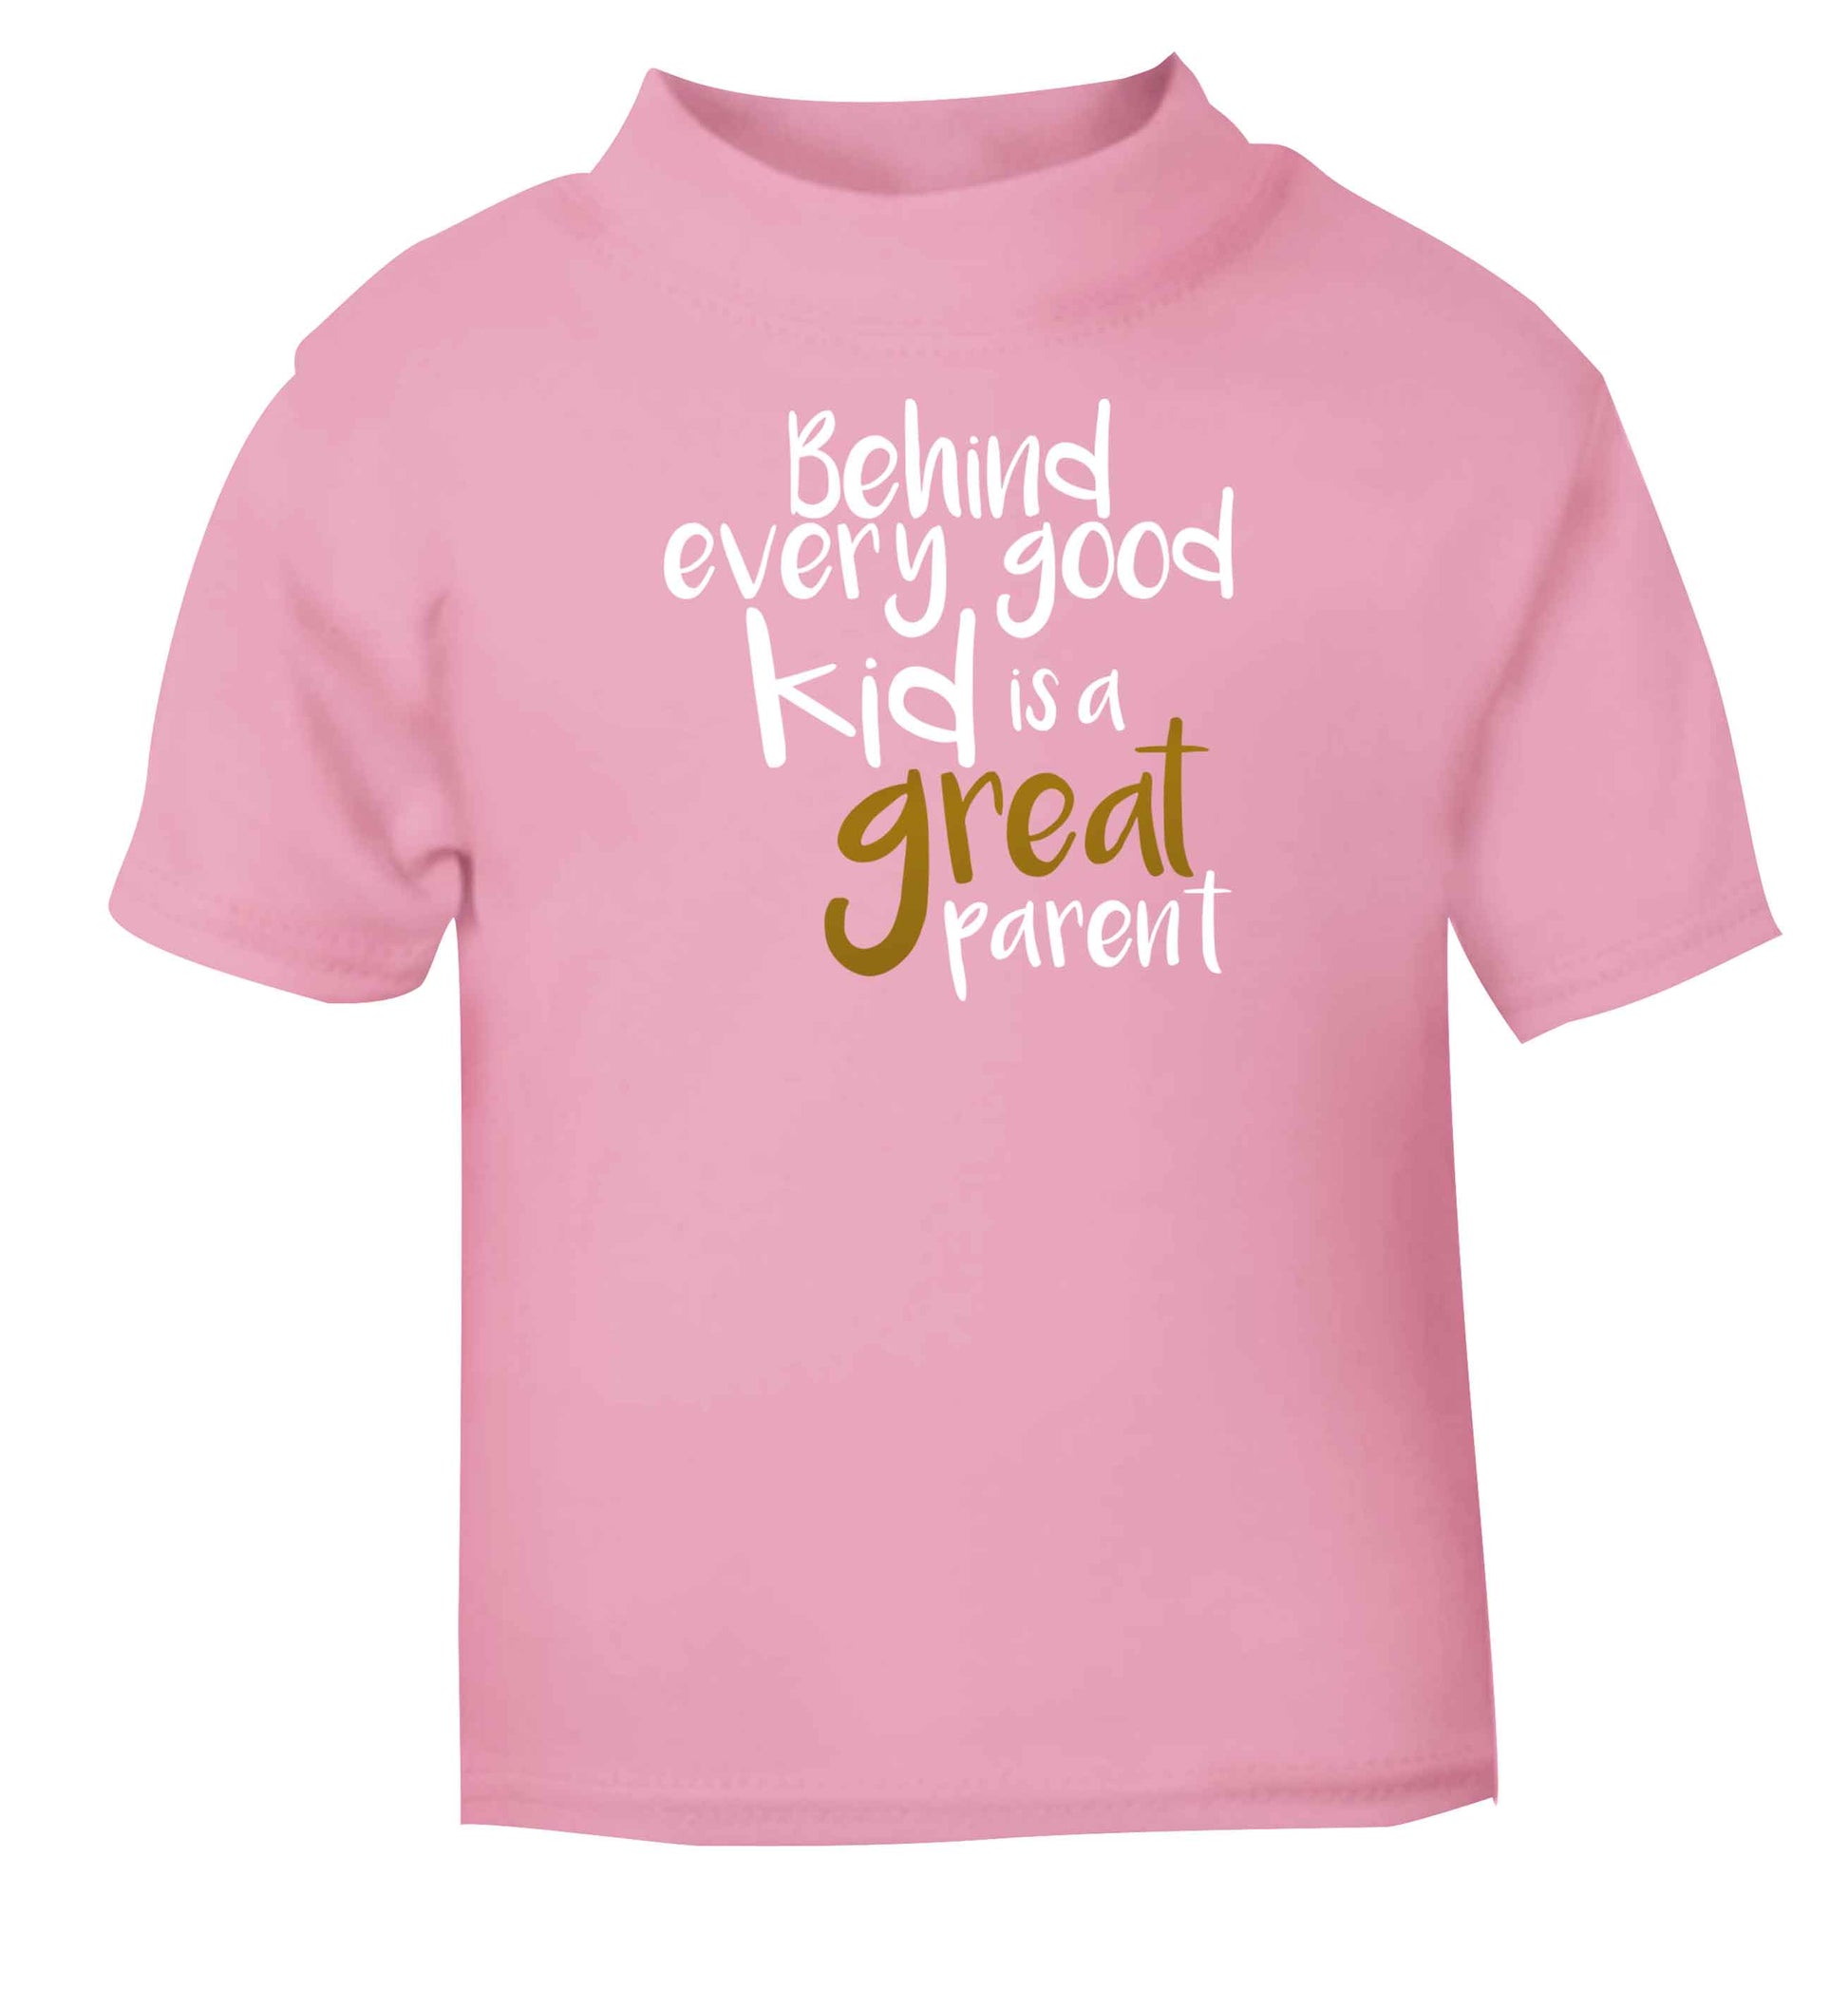 Behind every good kid is a great parent Children's light pink Tshirt 12-13 Years